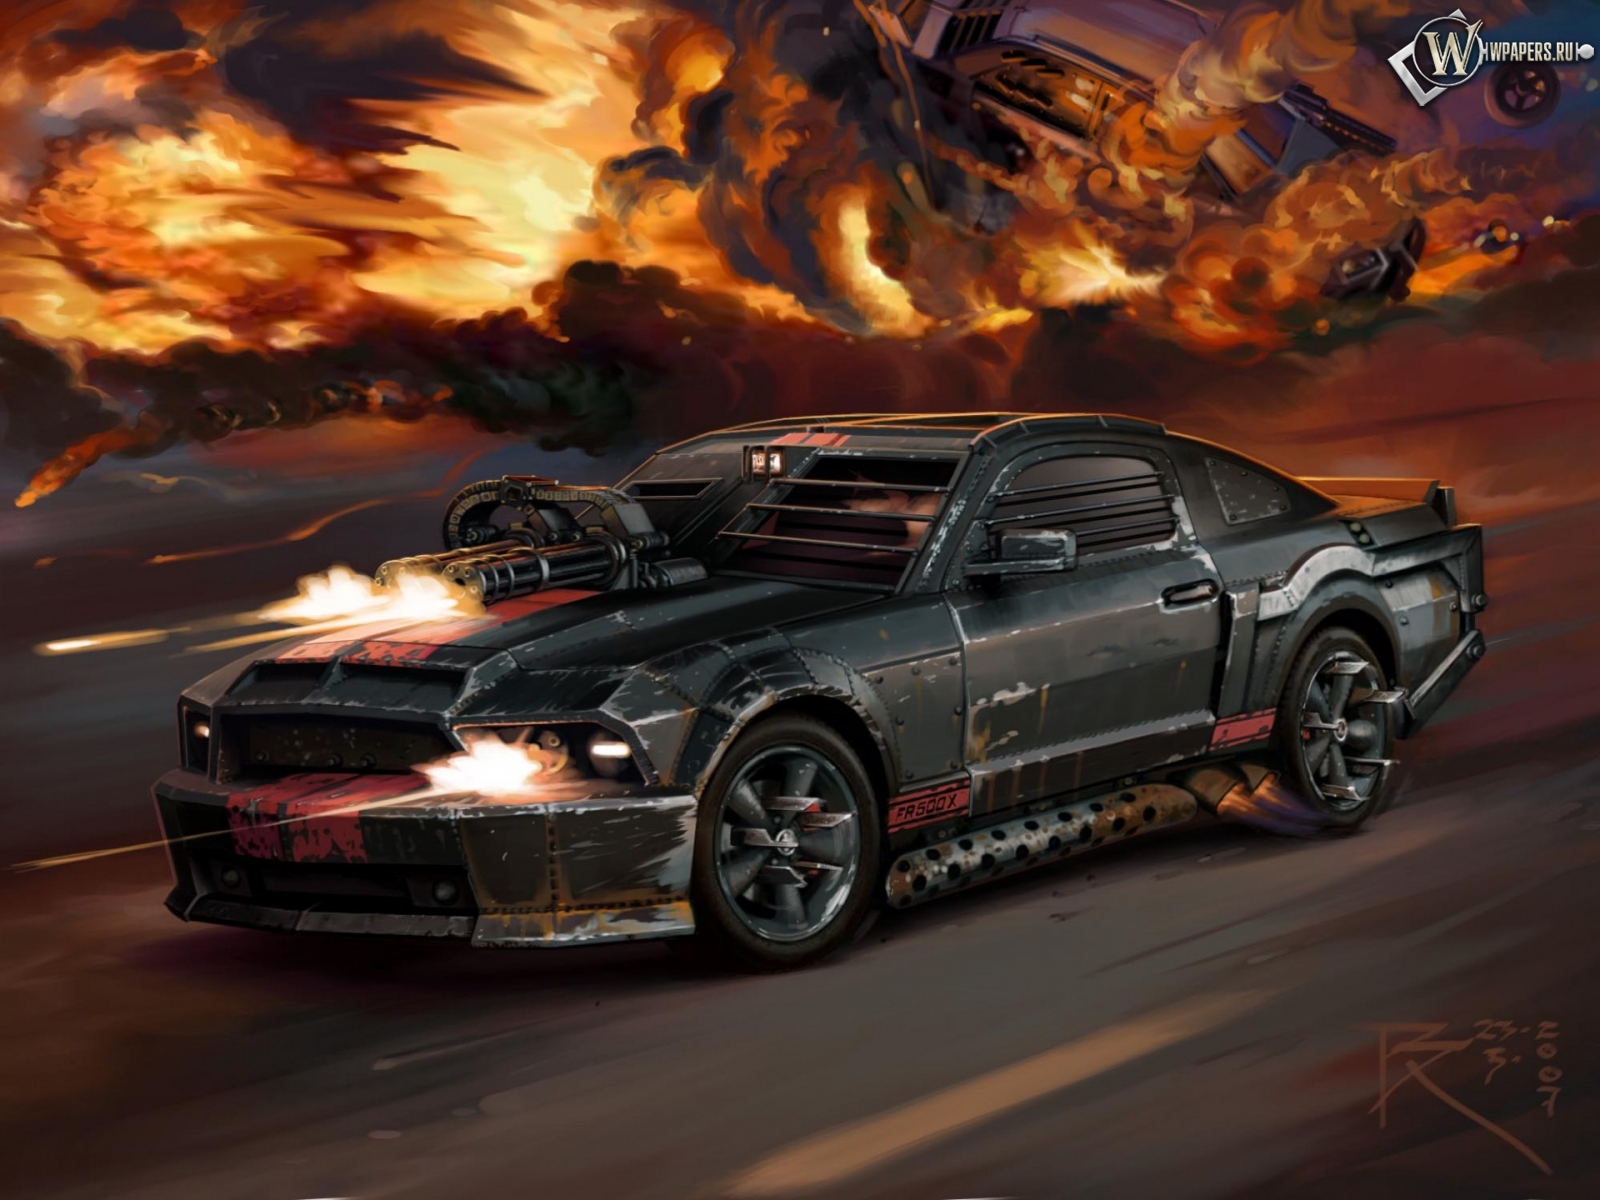 Car ford mustang death race 1600x1200